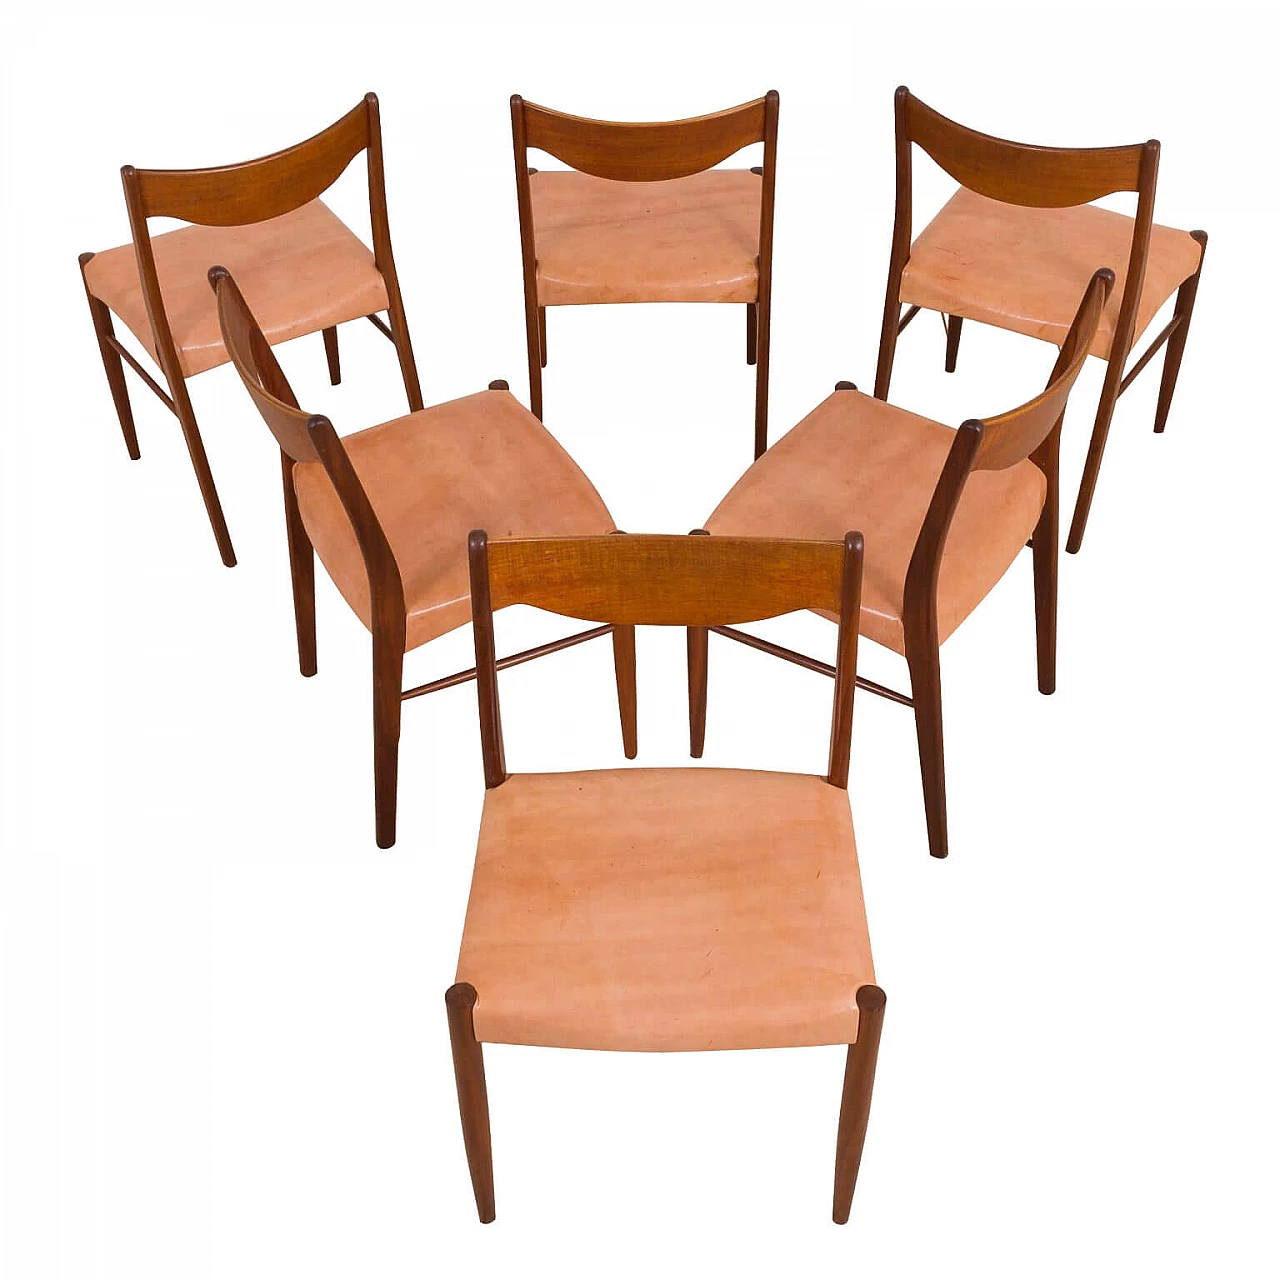 6 GS60 chairs in teak and leather by Arne Wahl Iversen for Glyngøre Stolefabrik, 60s 1270334